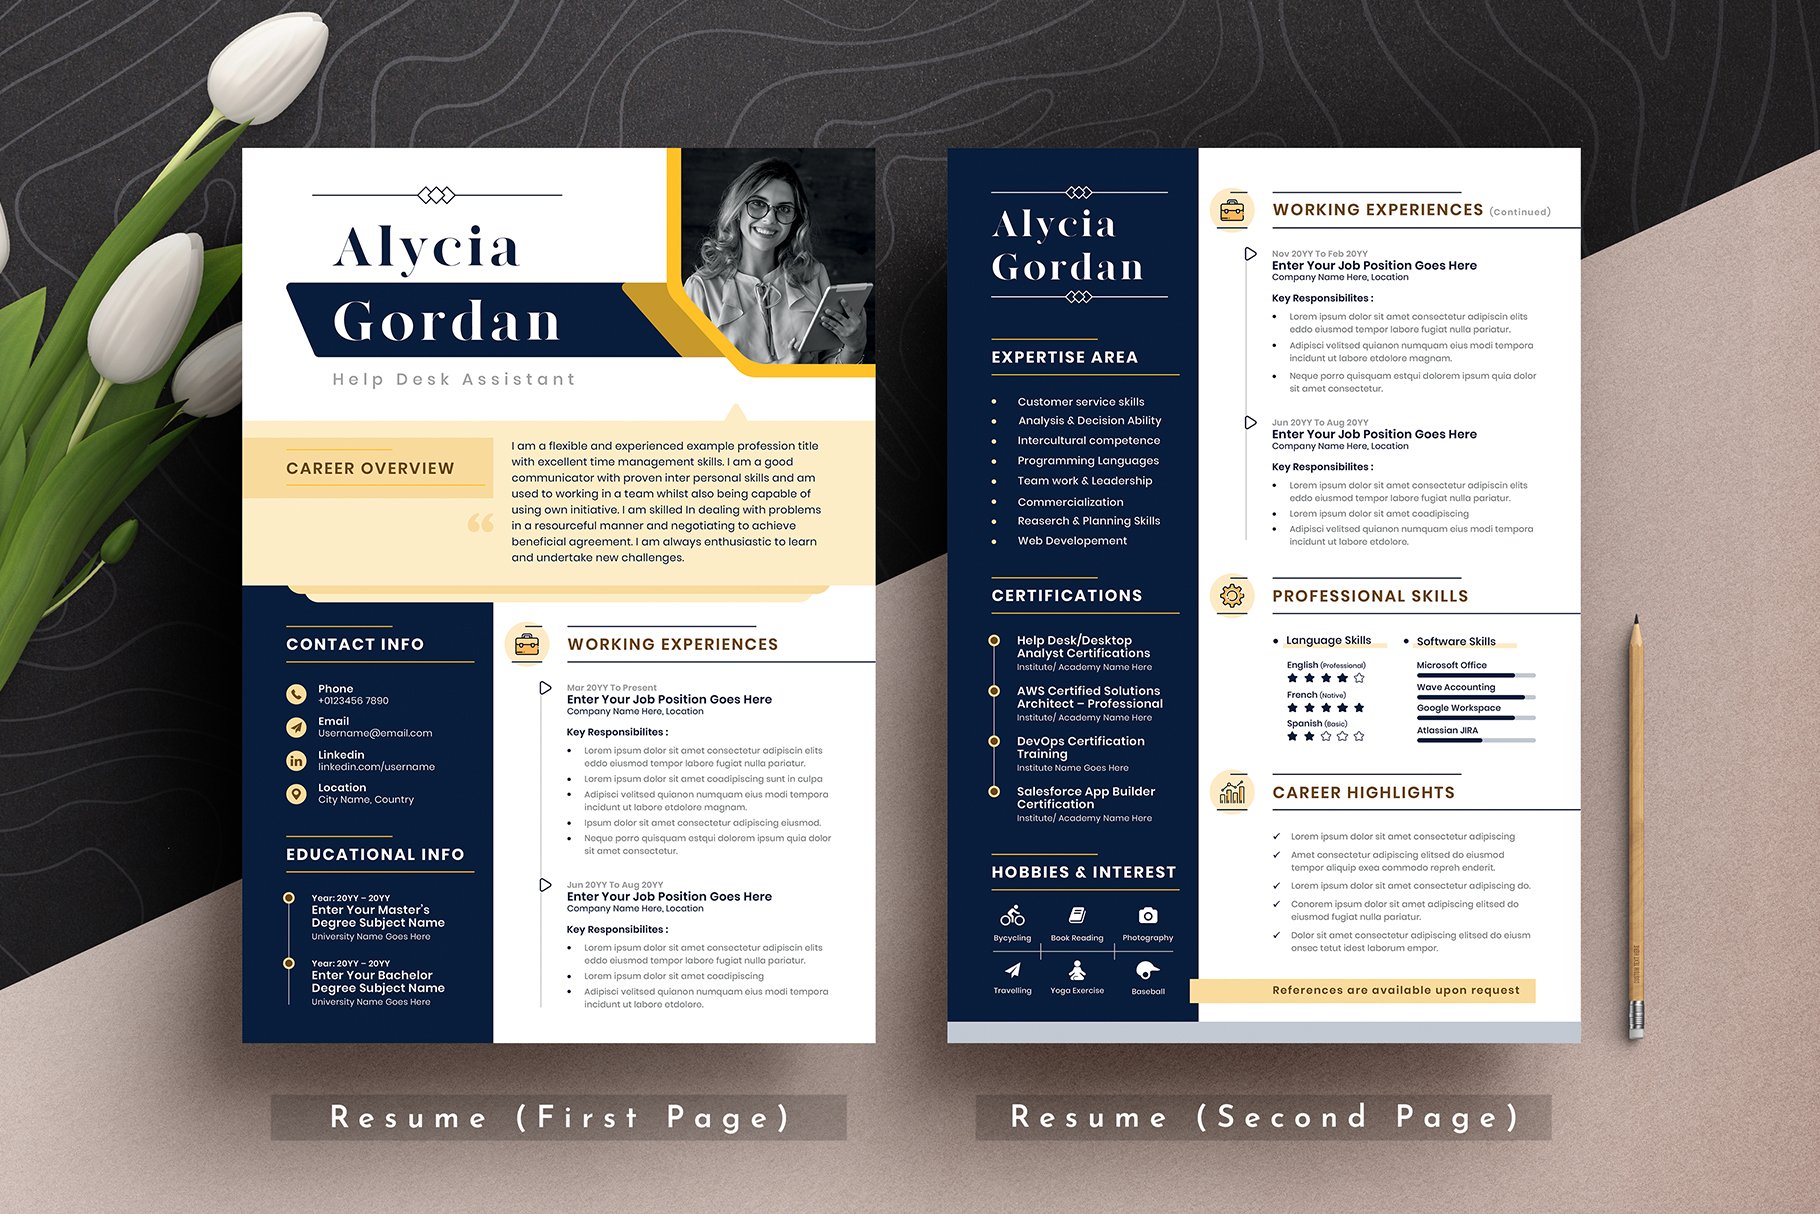 Personal Shopper Resume - Download in Word, Apple Pages